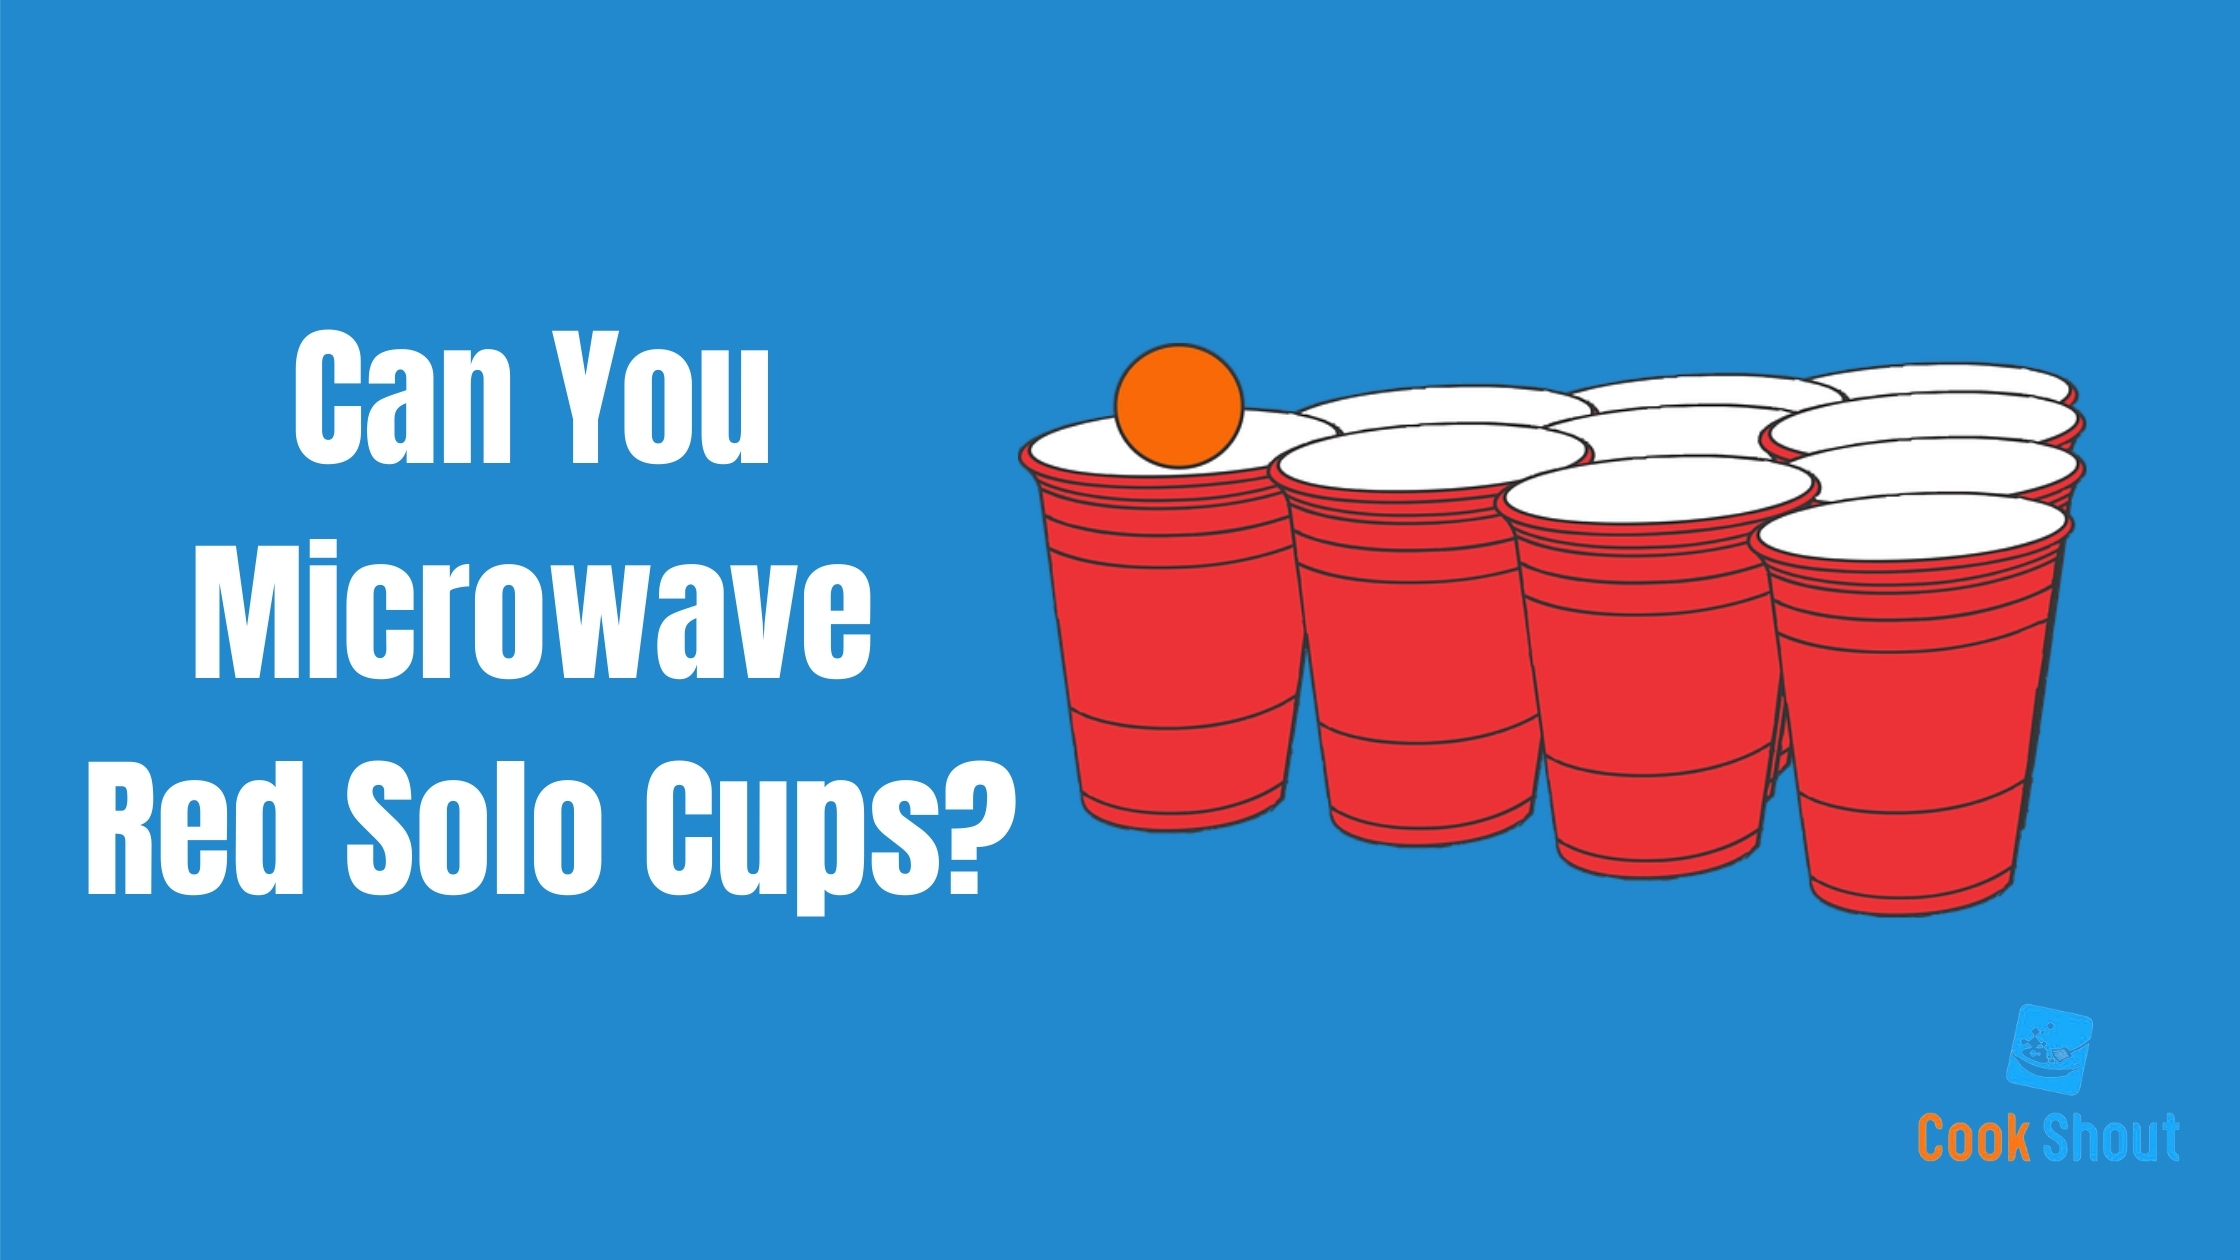 Can You Microwave Red Solo Cups